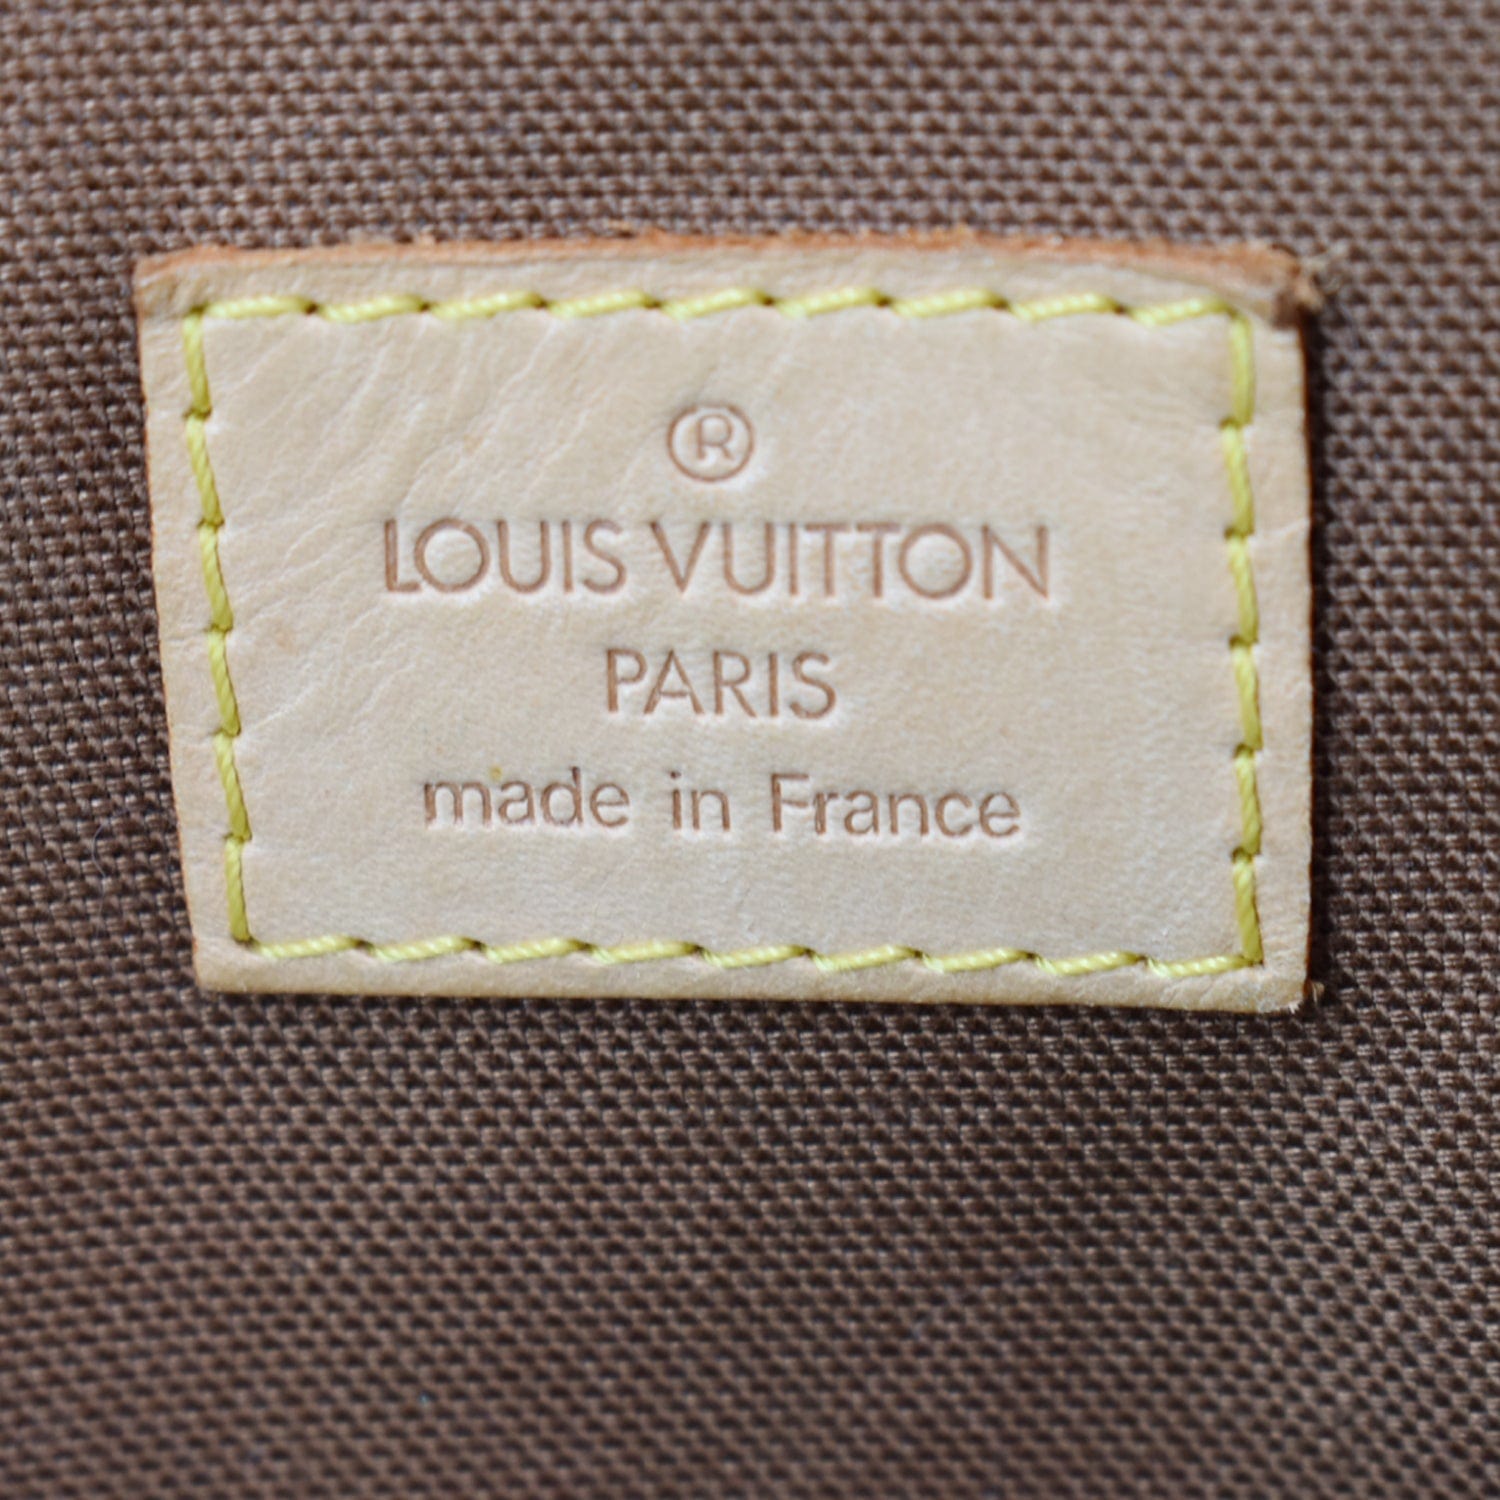 LOUIS VUITTON Lockit Horizontal Tote in Monogram Canvas - More Than You Can  Imagine